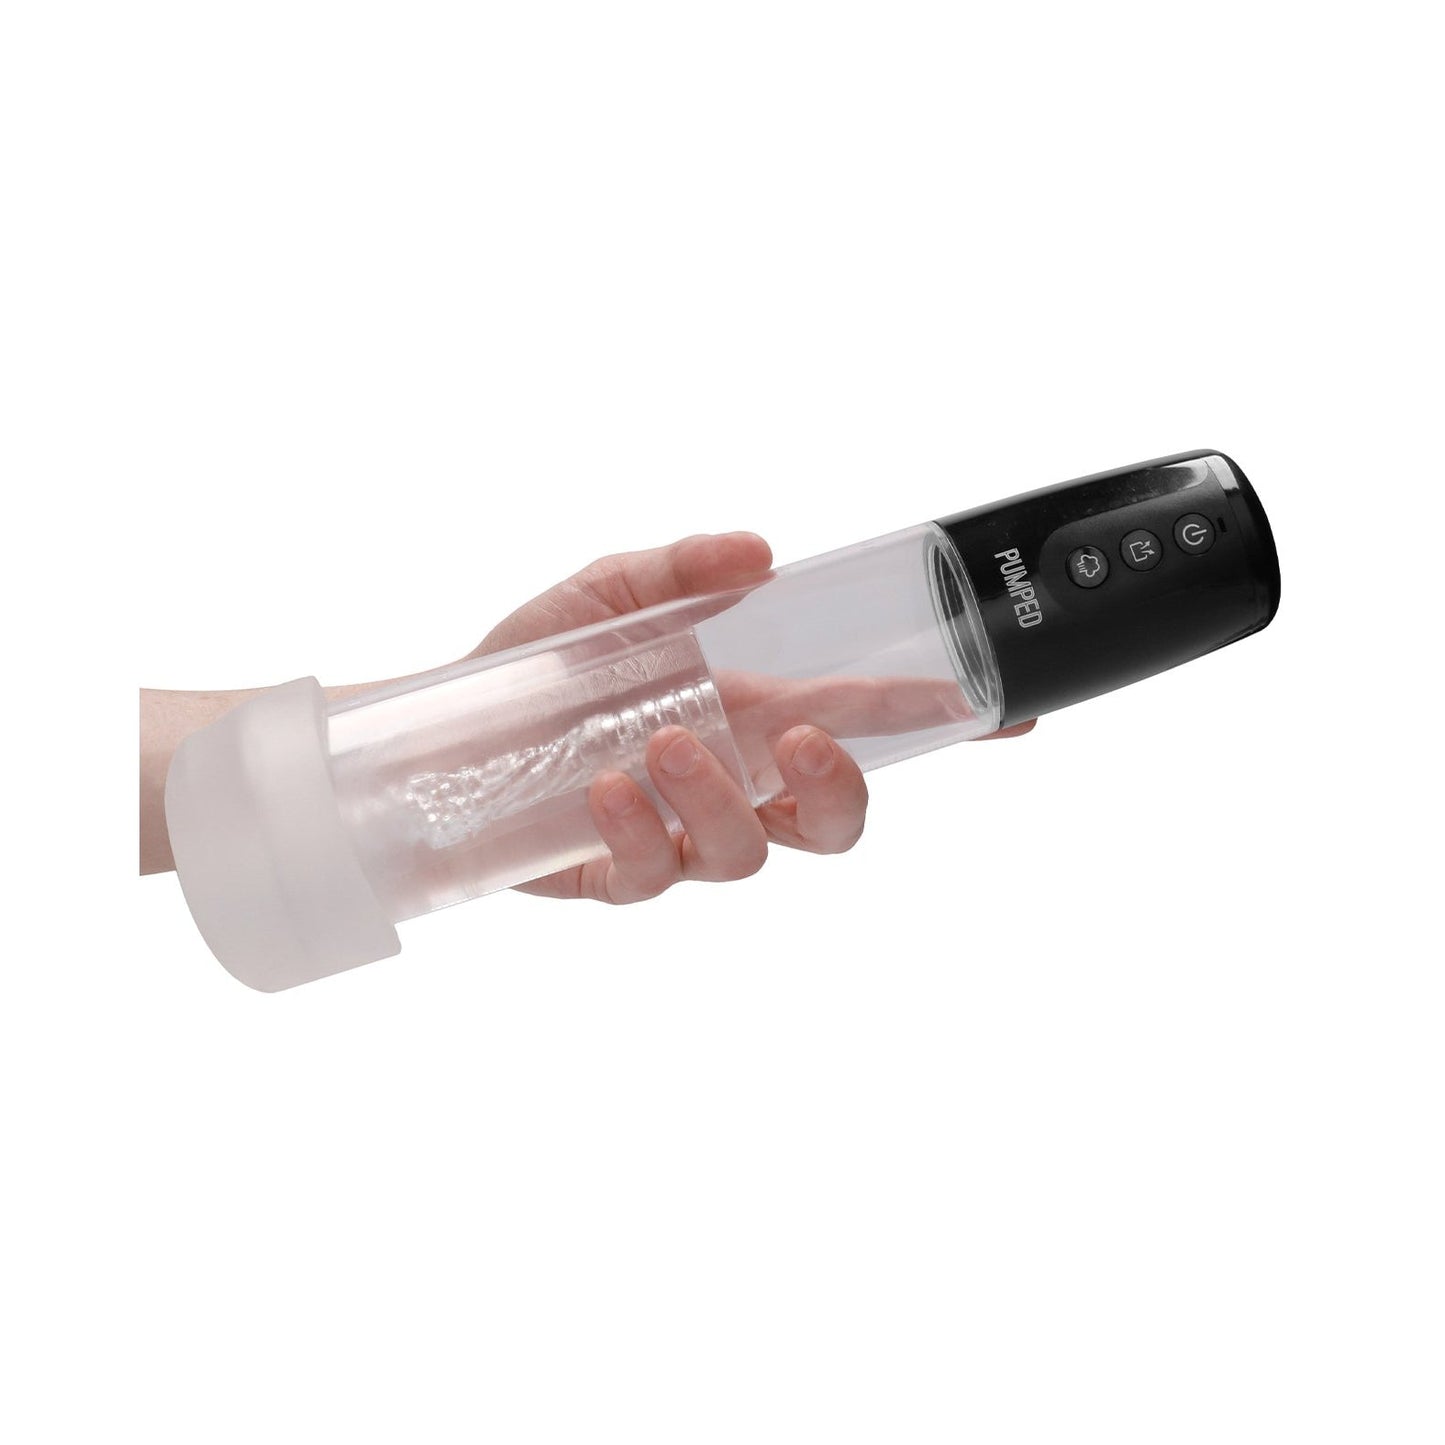 Shots Pumped Automatic Cyber Pump Masturbation Sleeve w/ Free Silicone Cock Ring